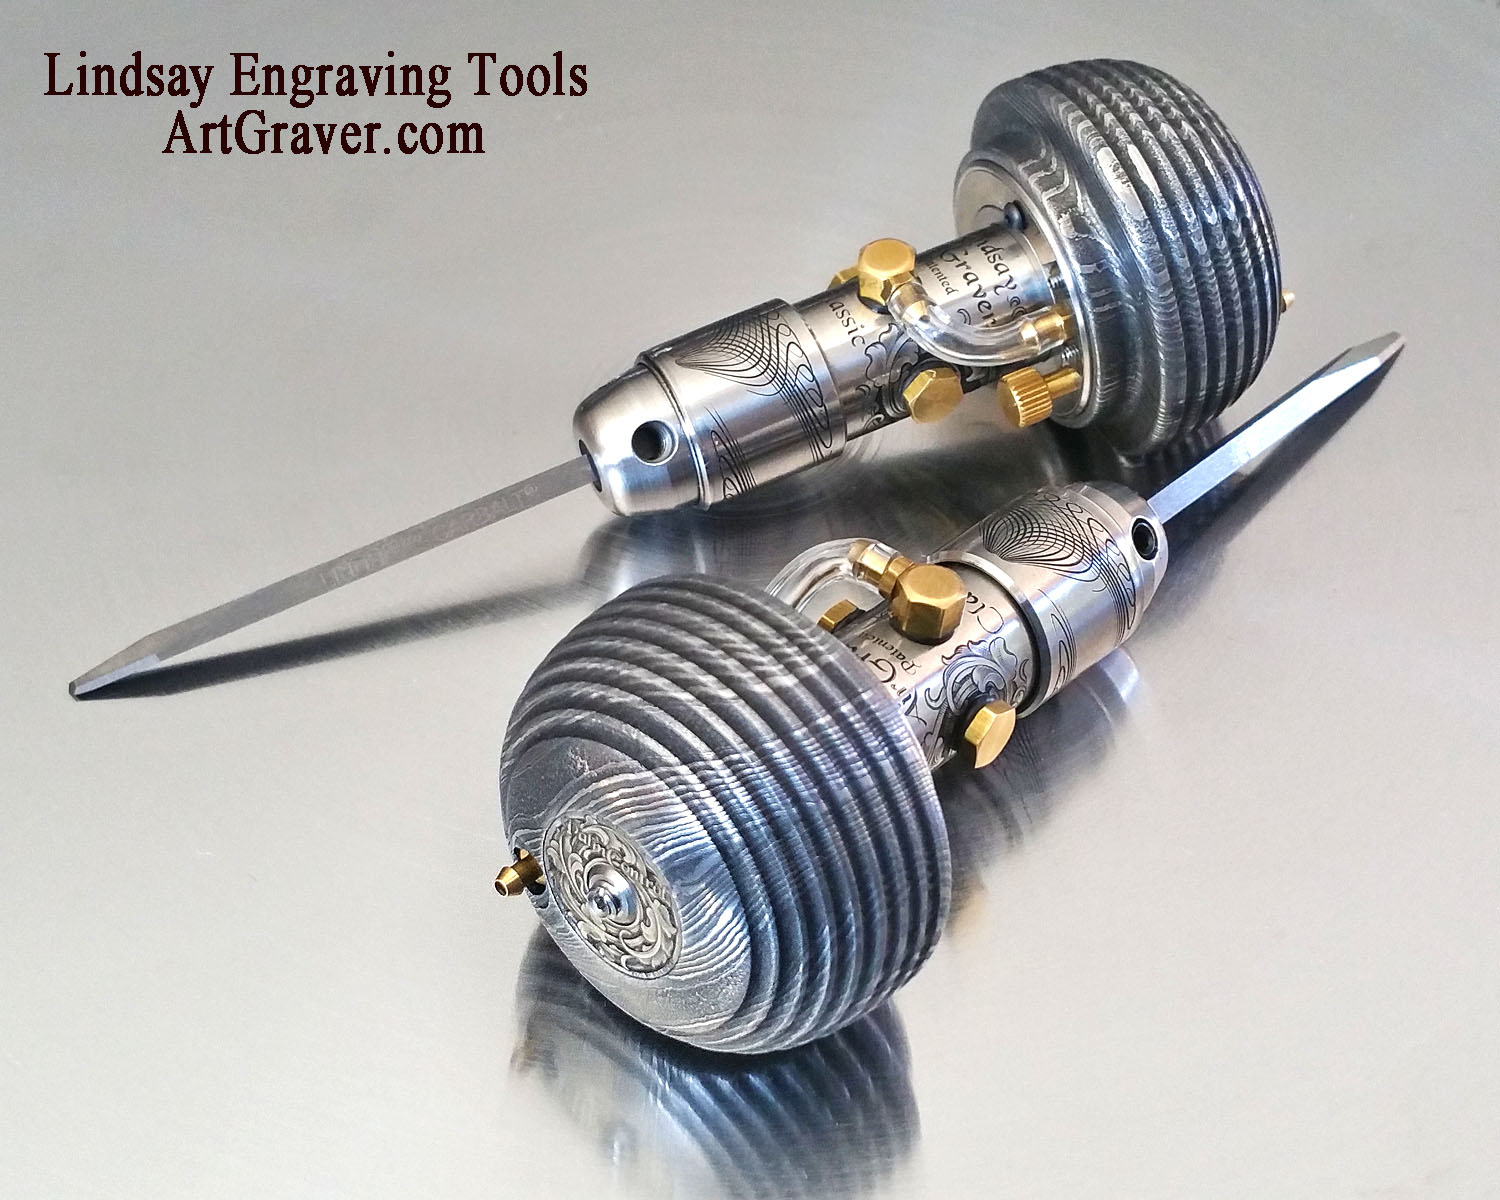 Air Chasing Graver for Jewelers, Engravers and Artists